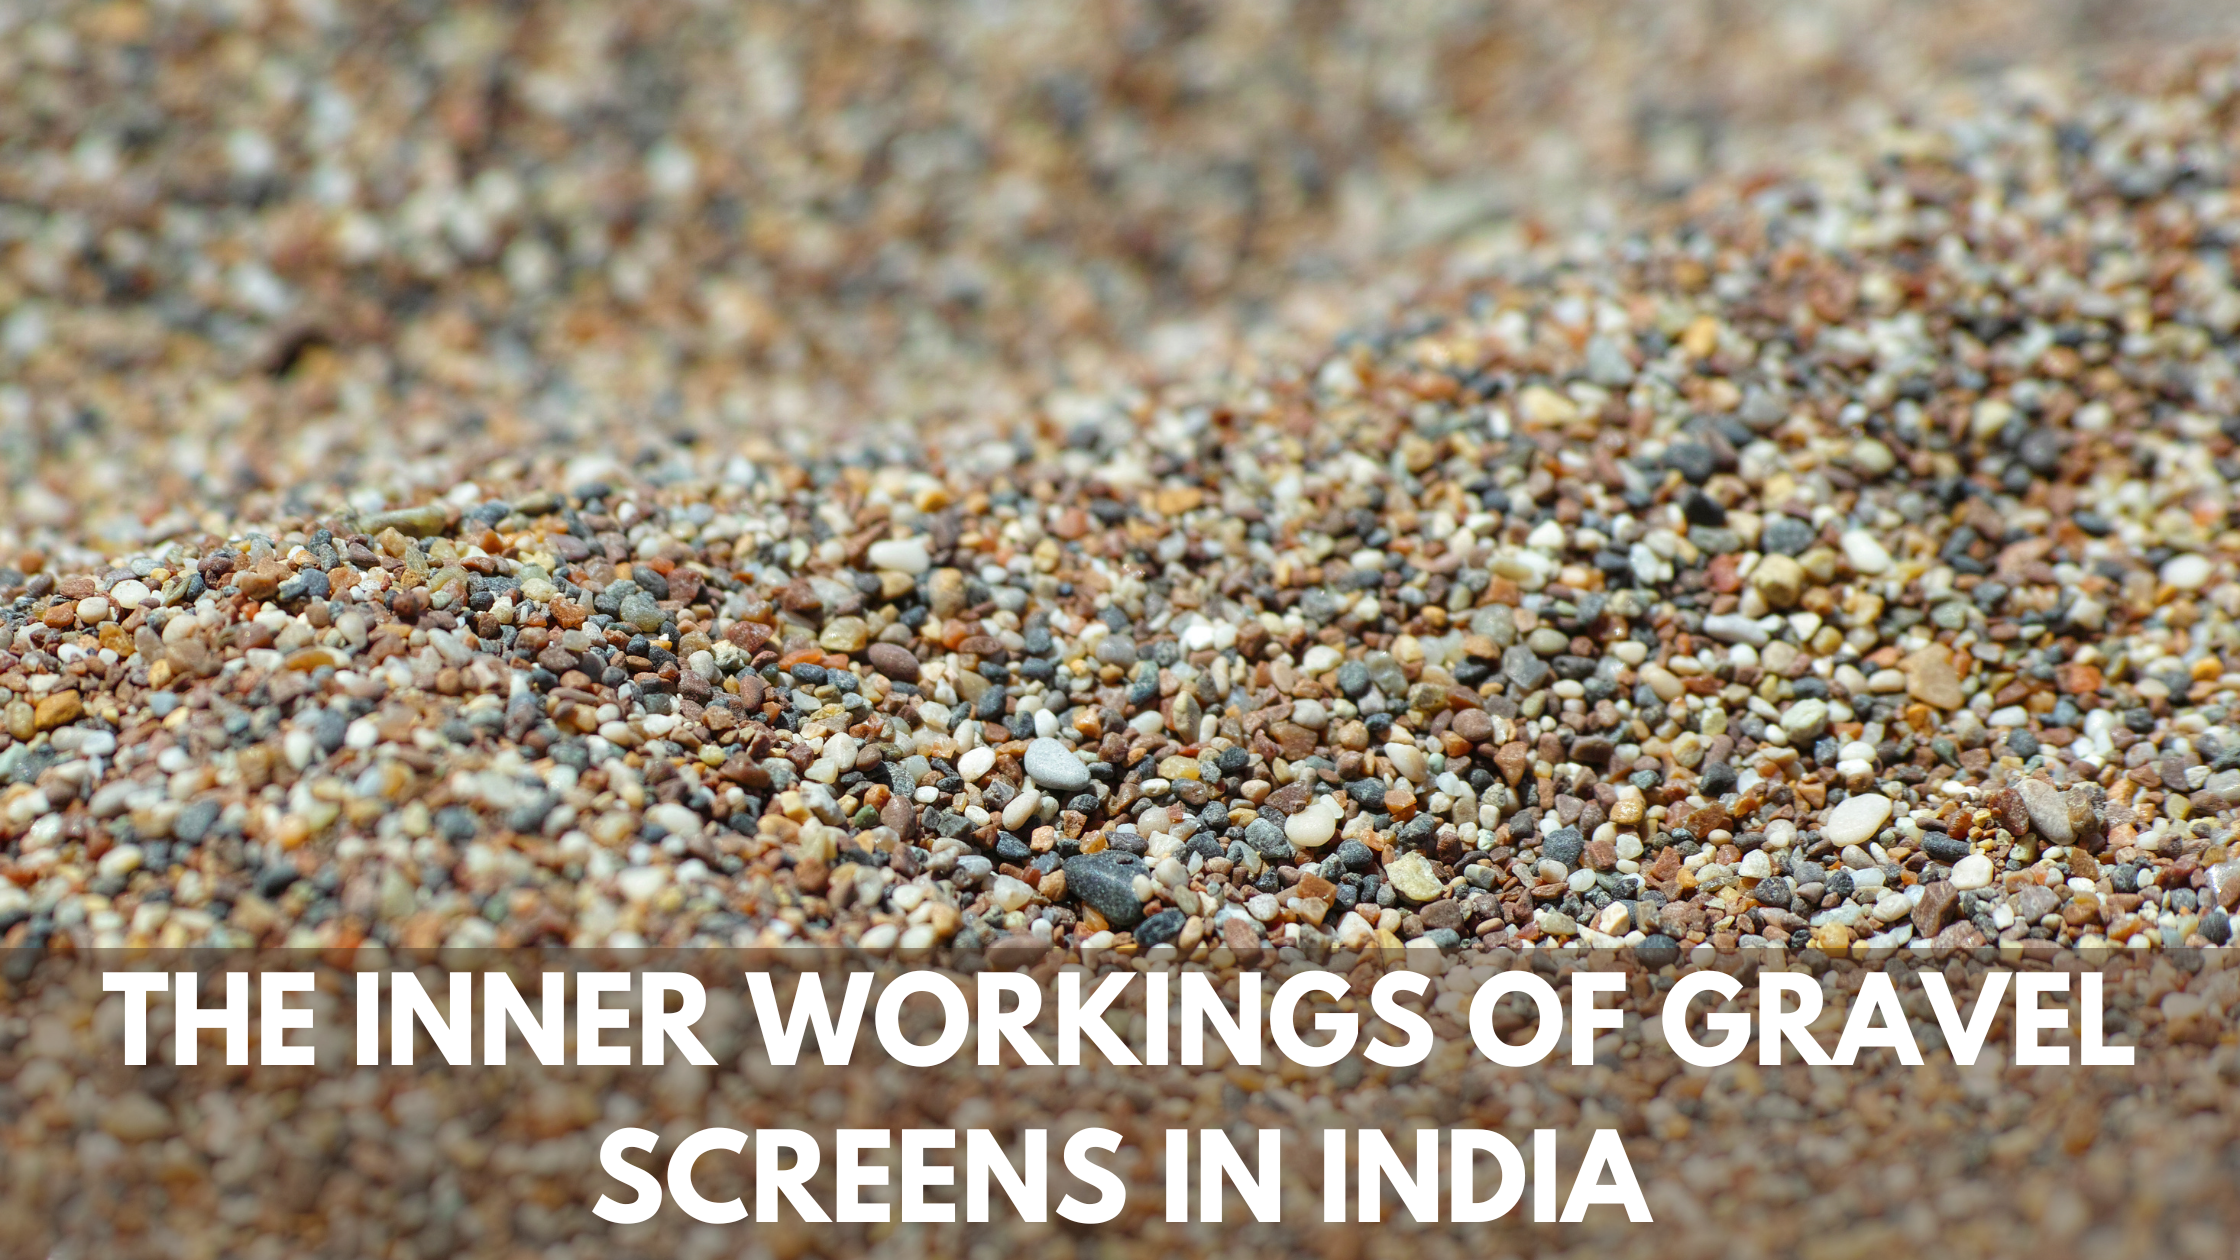 The inner workings of gravel screens in India